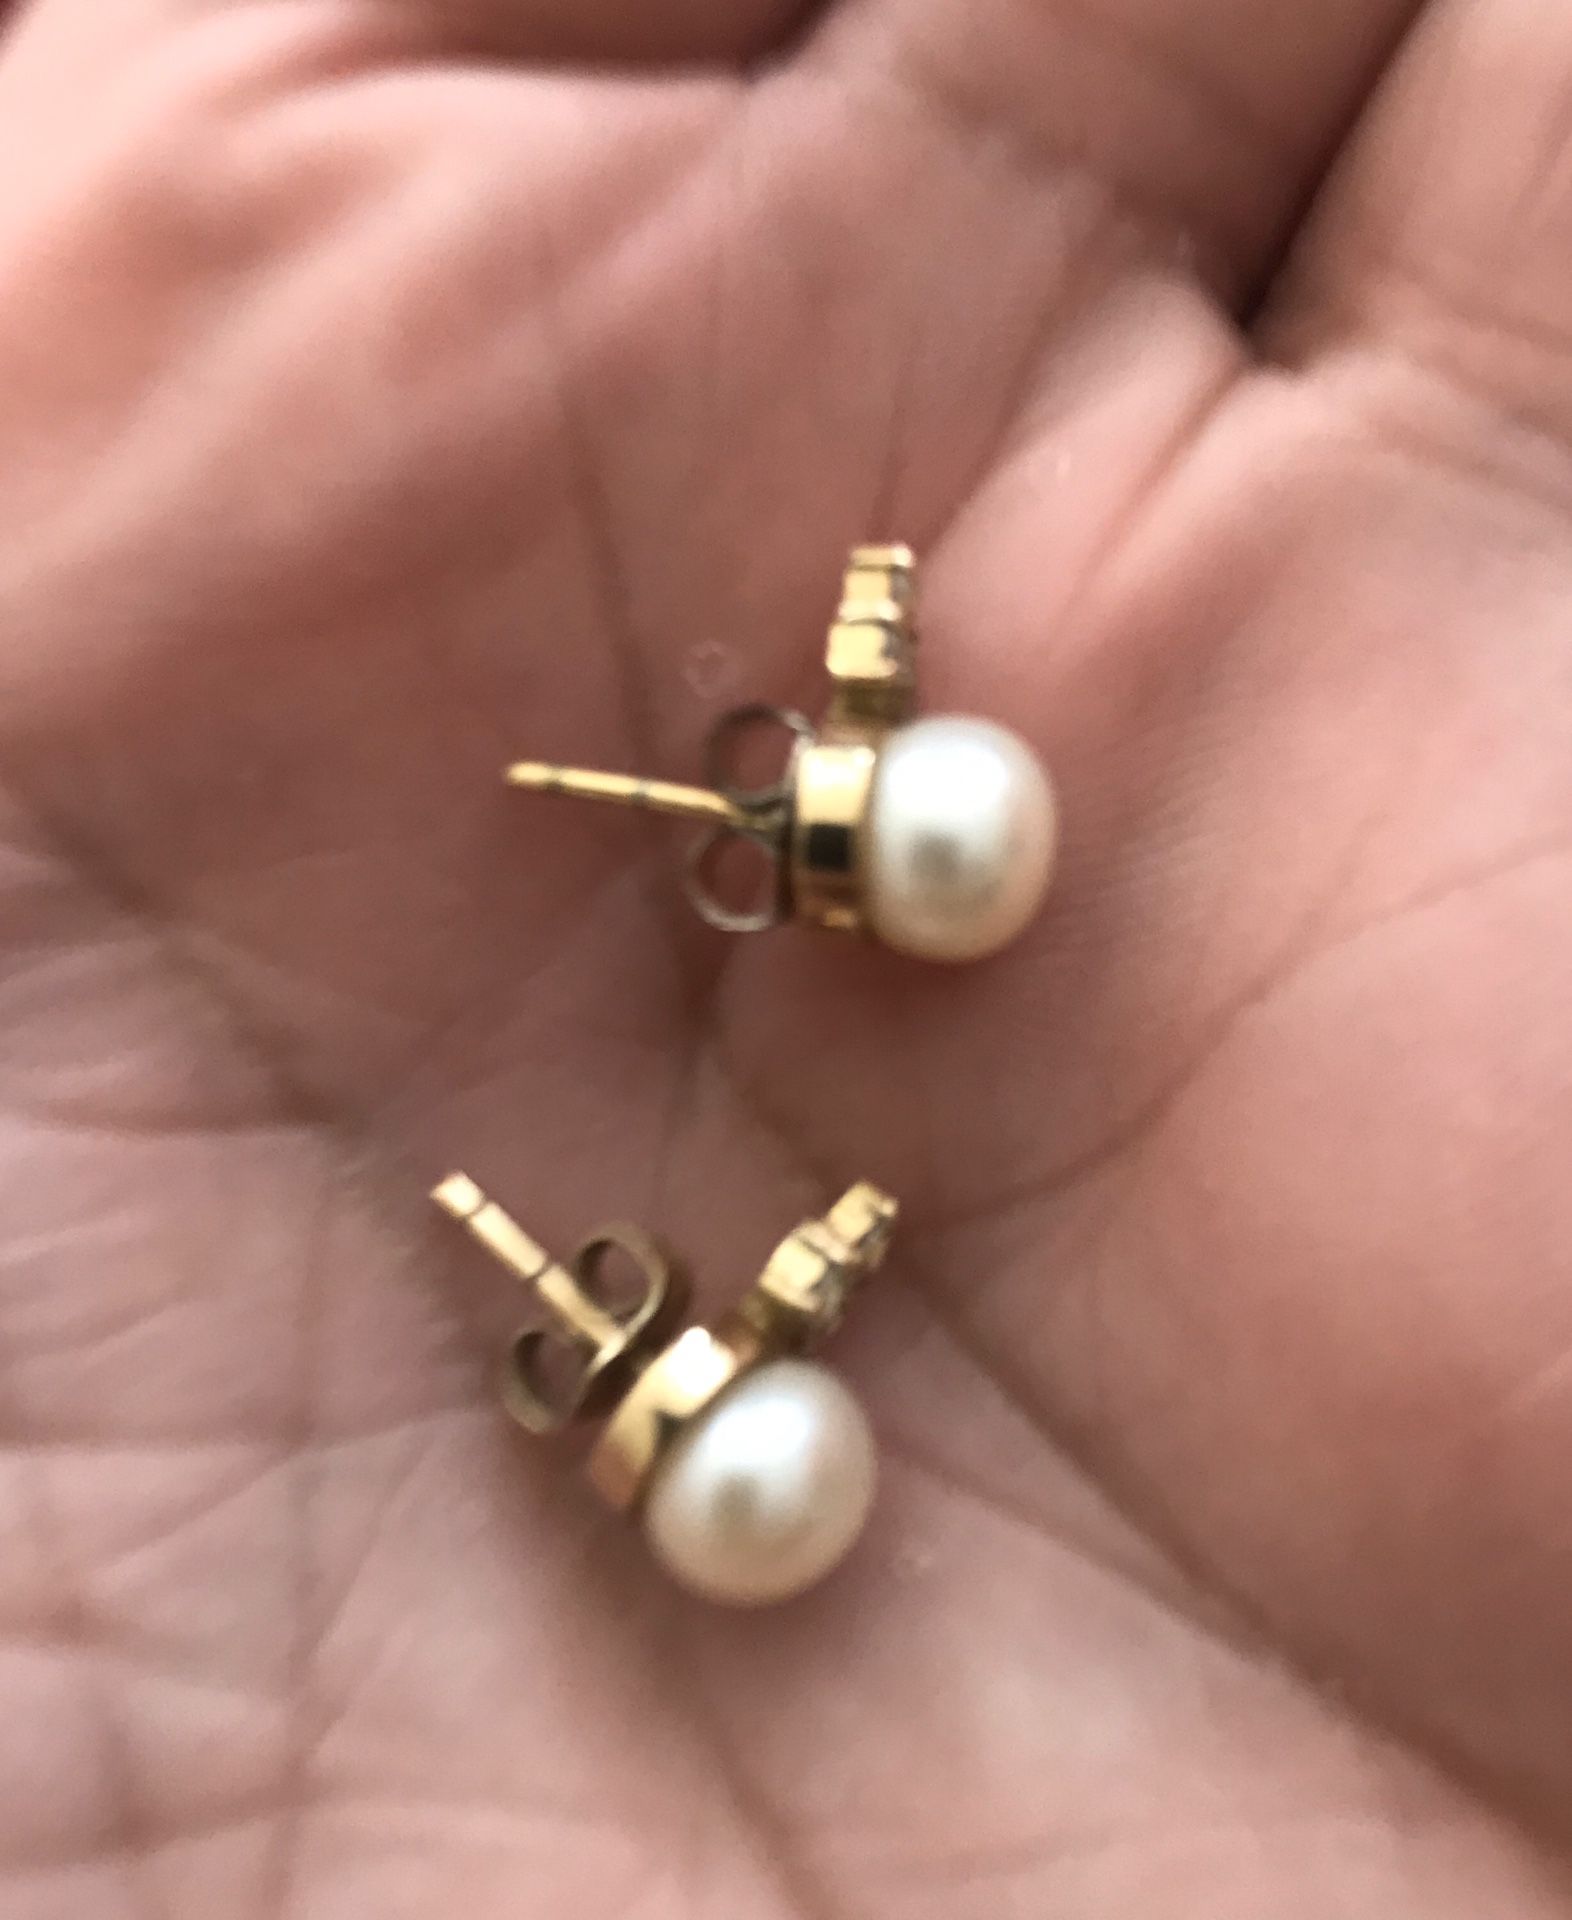 New. 14k yellow gold pearl and diamond earrings. Pearls are natural and diamonds real. Solid gold. Great gift for the woman in your life for Chri